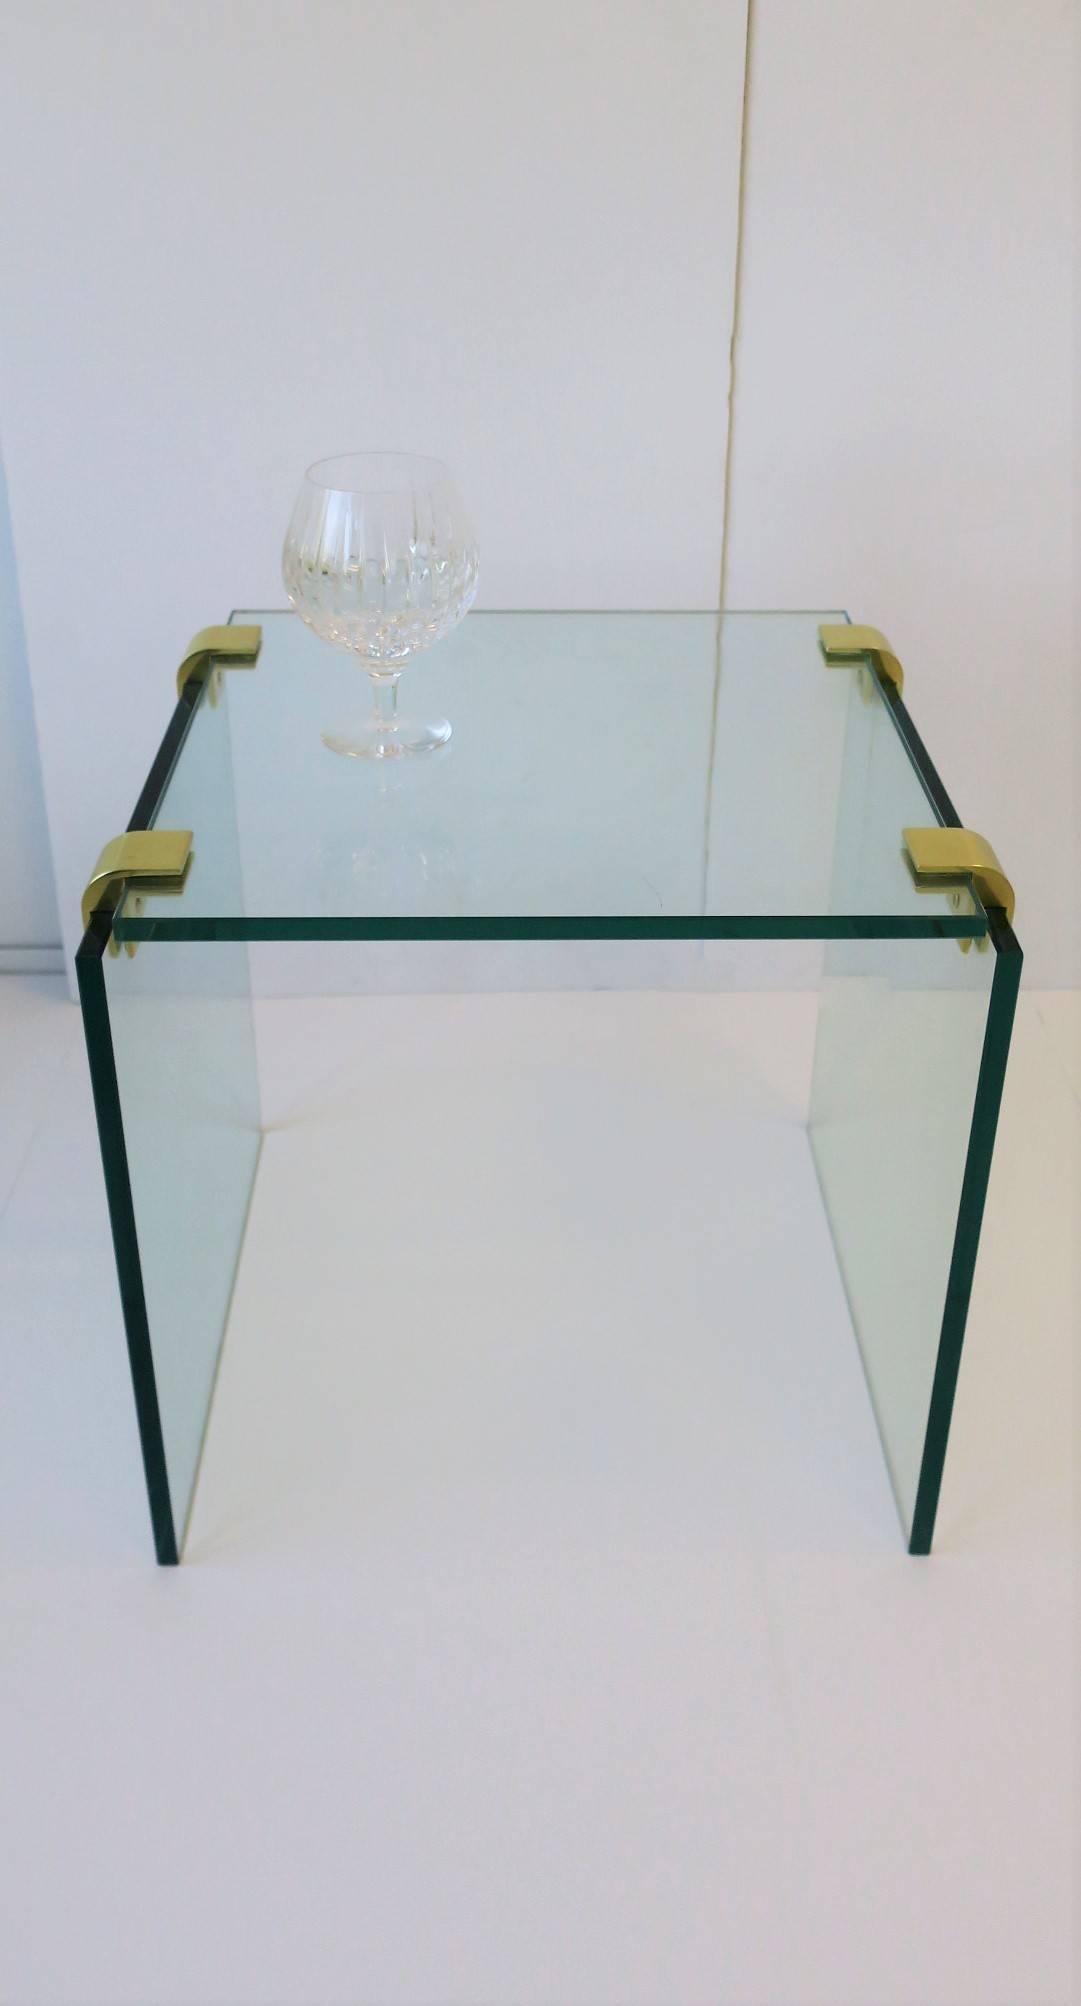 North American Modern Brass and Glass End or Side Table after Leon Rosen for Pace